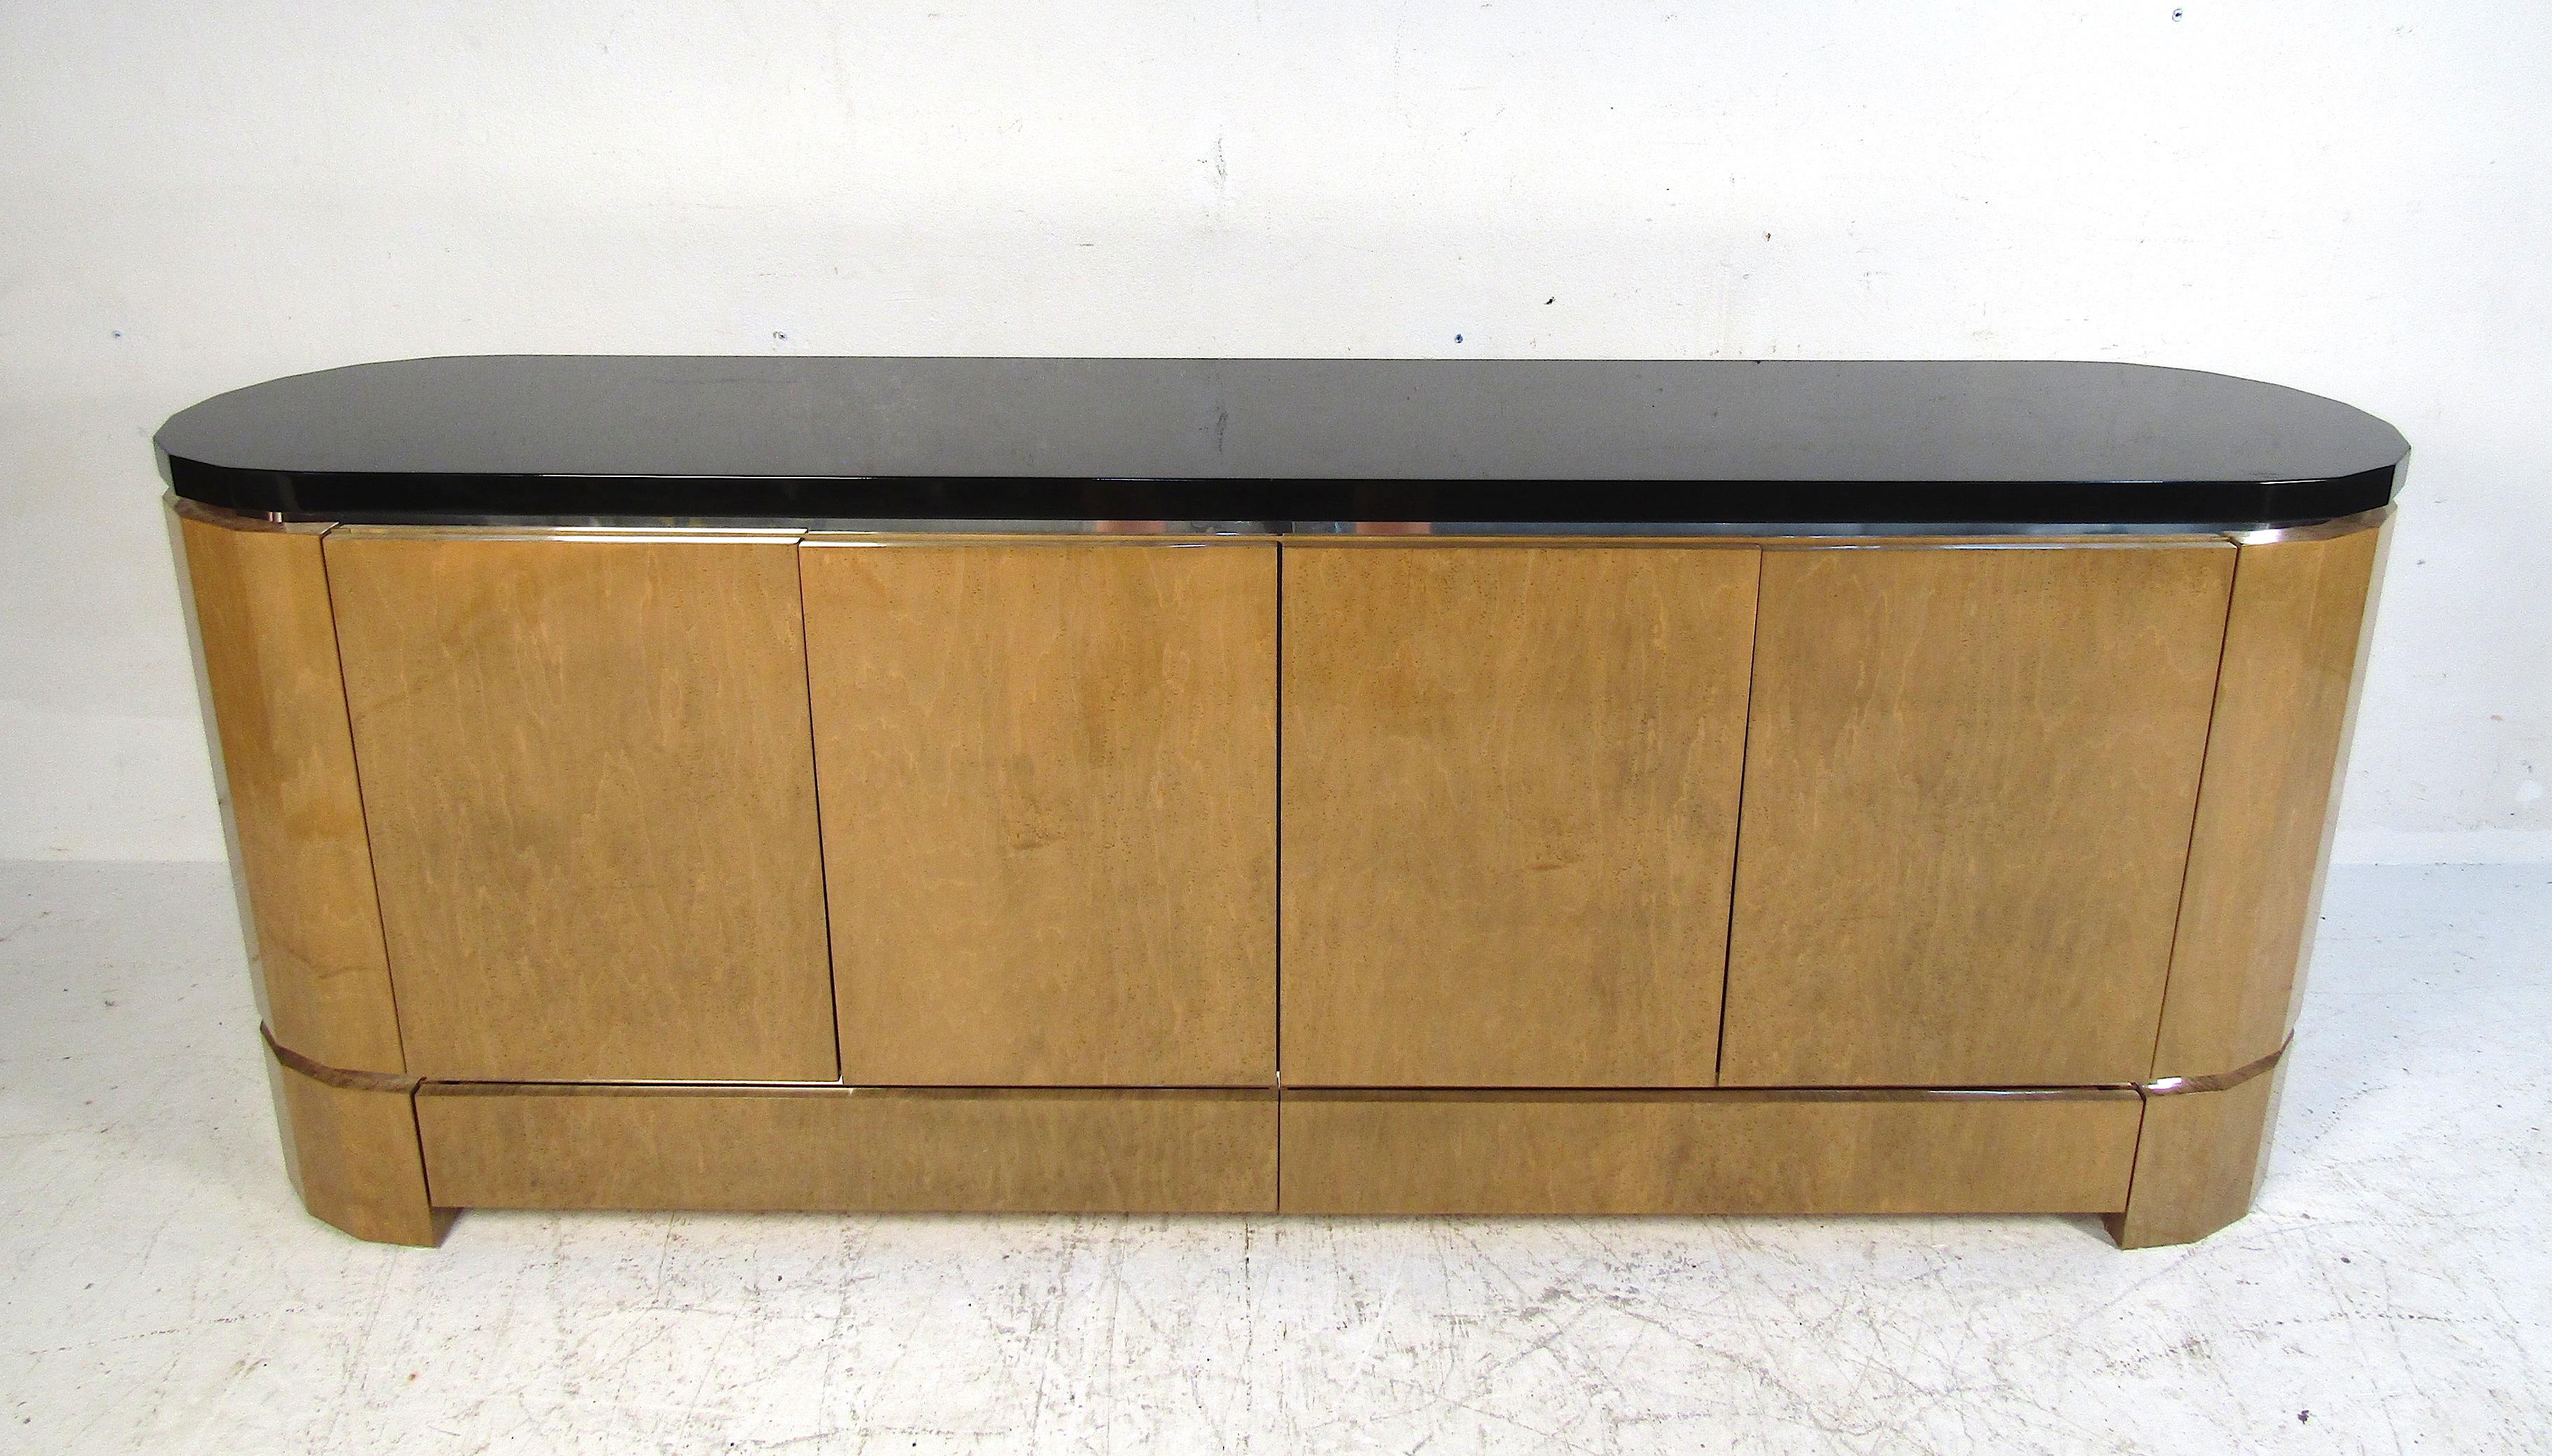 Stylish vintage sideboard. Large piece with ample storage space. Please confirm item location with dealer (NJ or NY).